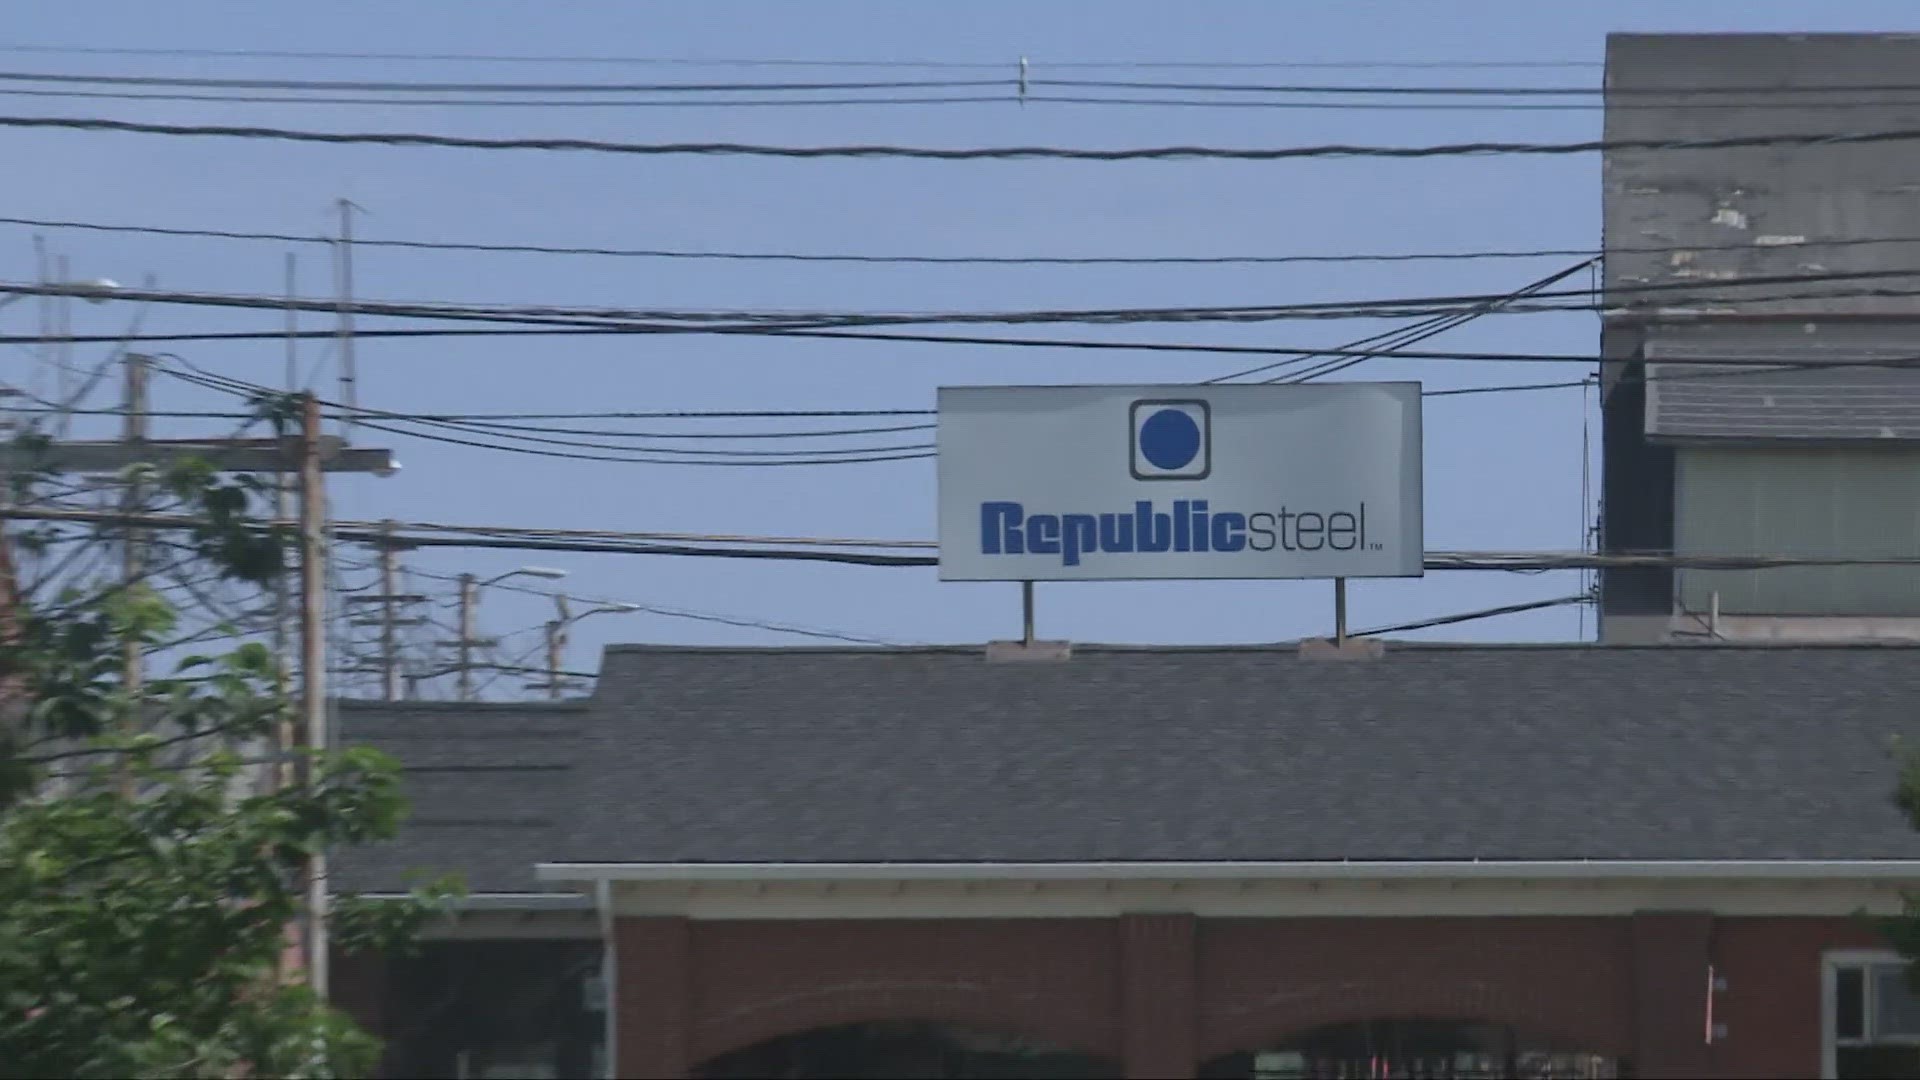 Grupo Simec, which owns Republic Steel, says about 500 employees will be furloughed indefinitely at its mills in Canton and western New York.